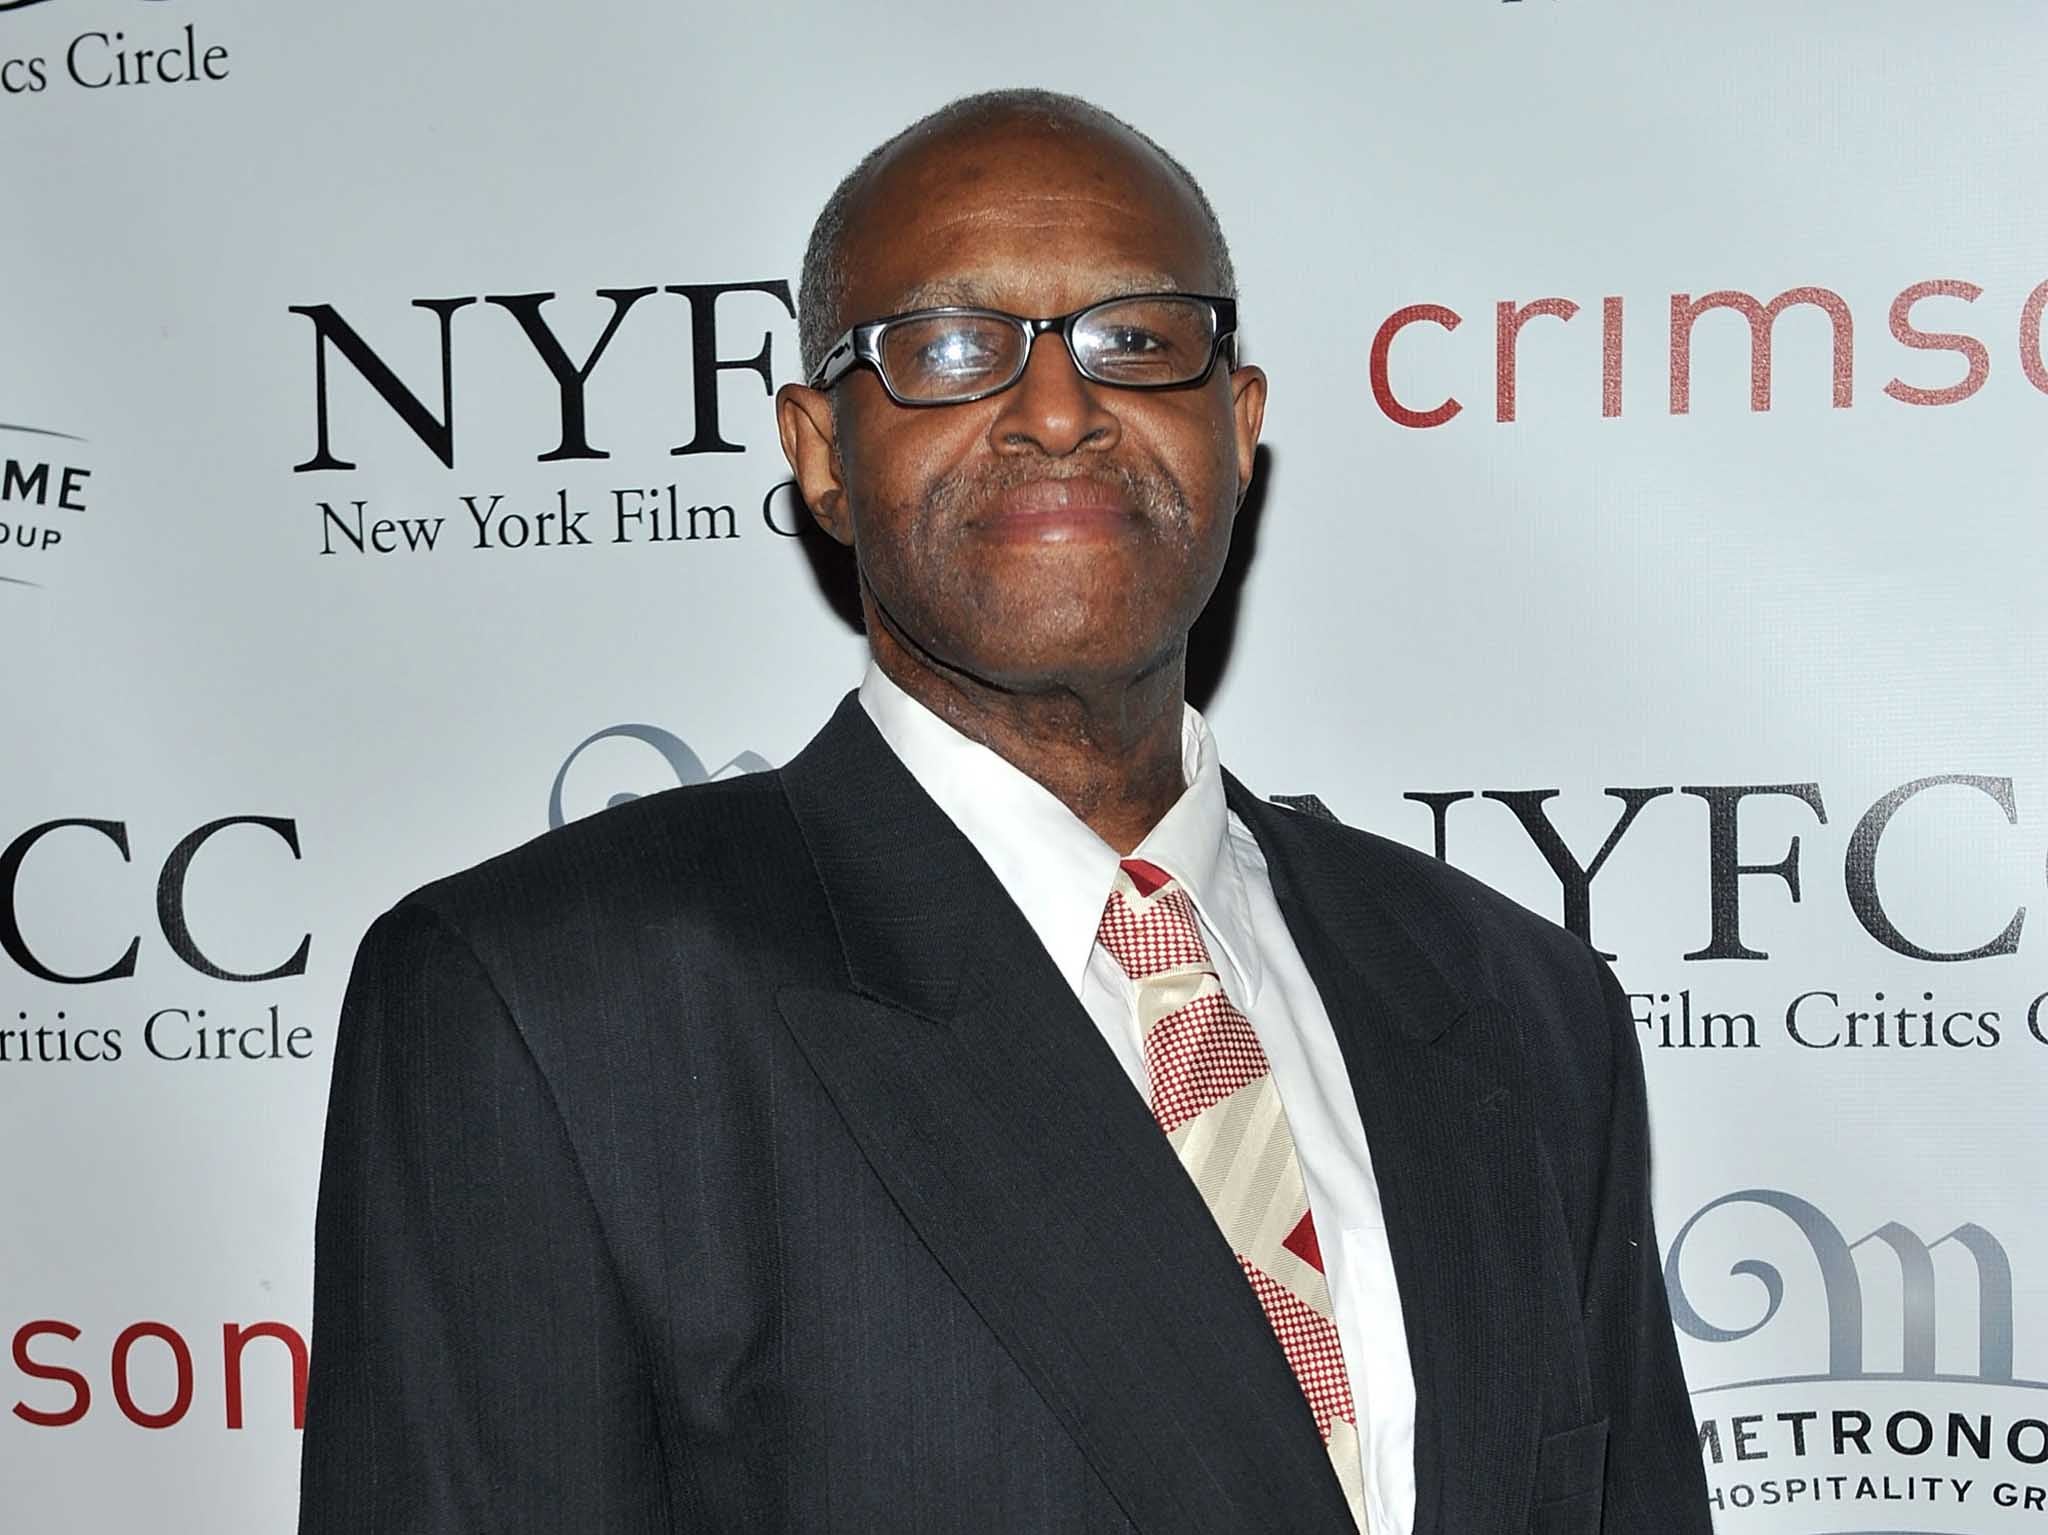 Armond White voted out of the New York Critics Circle for heckling